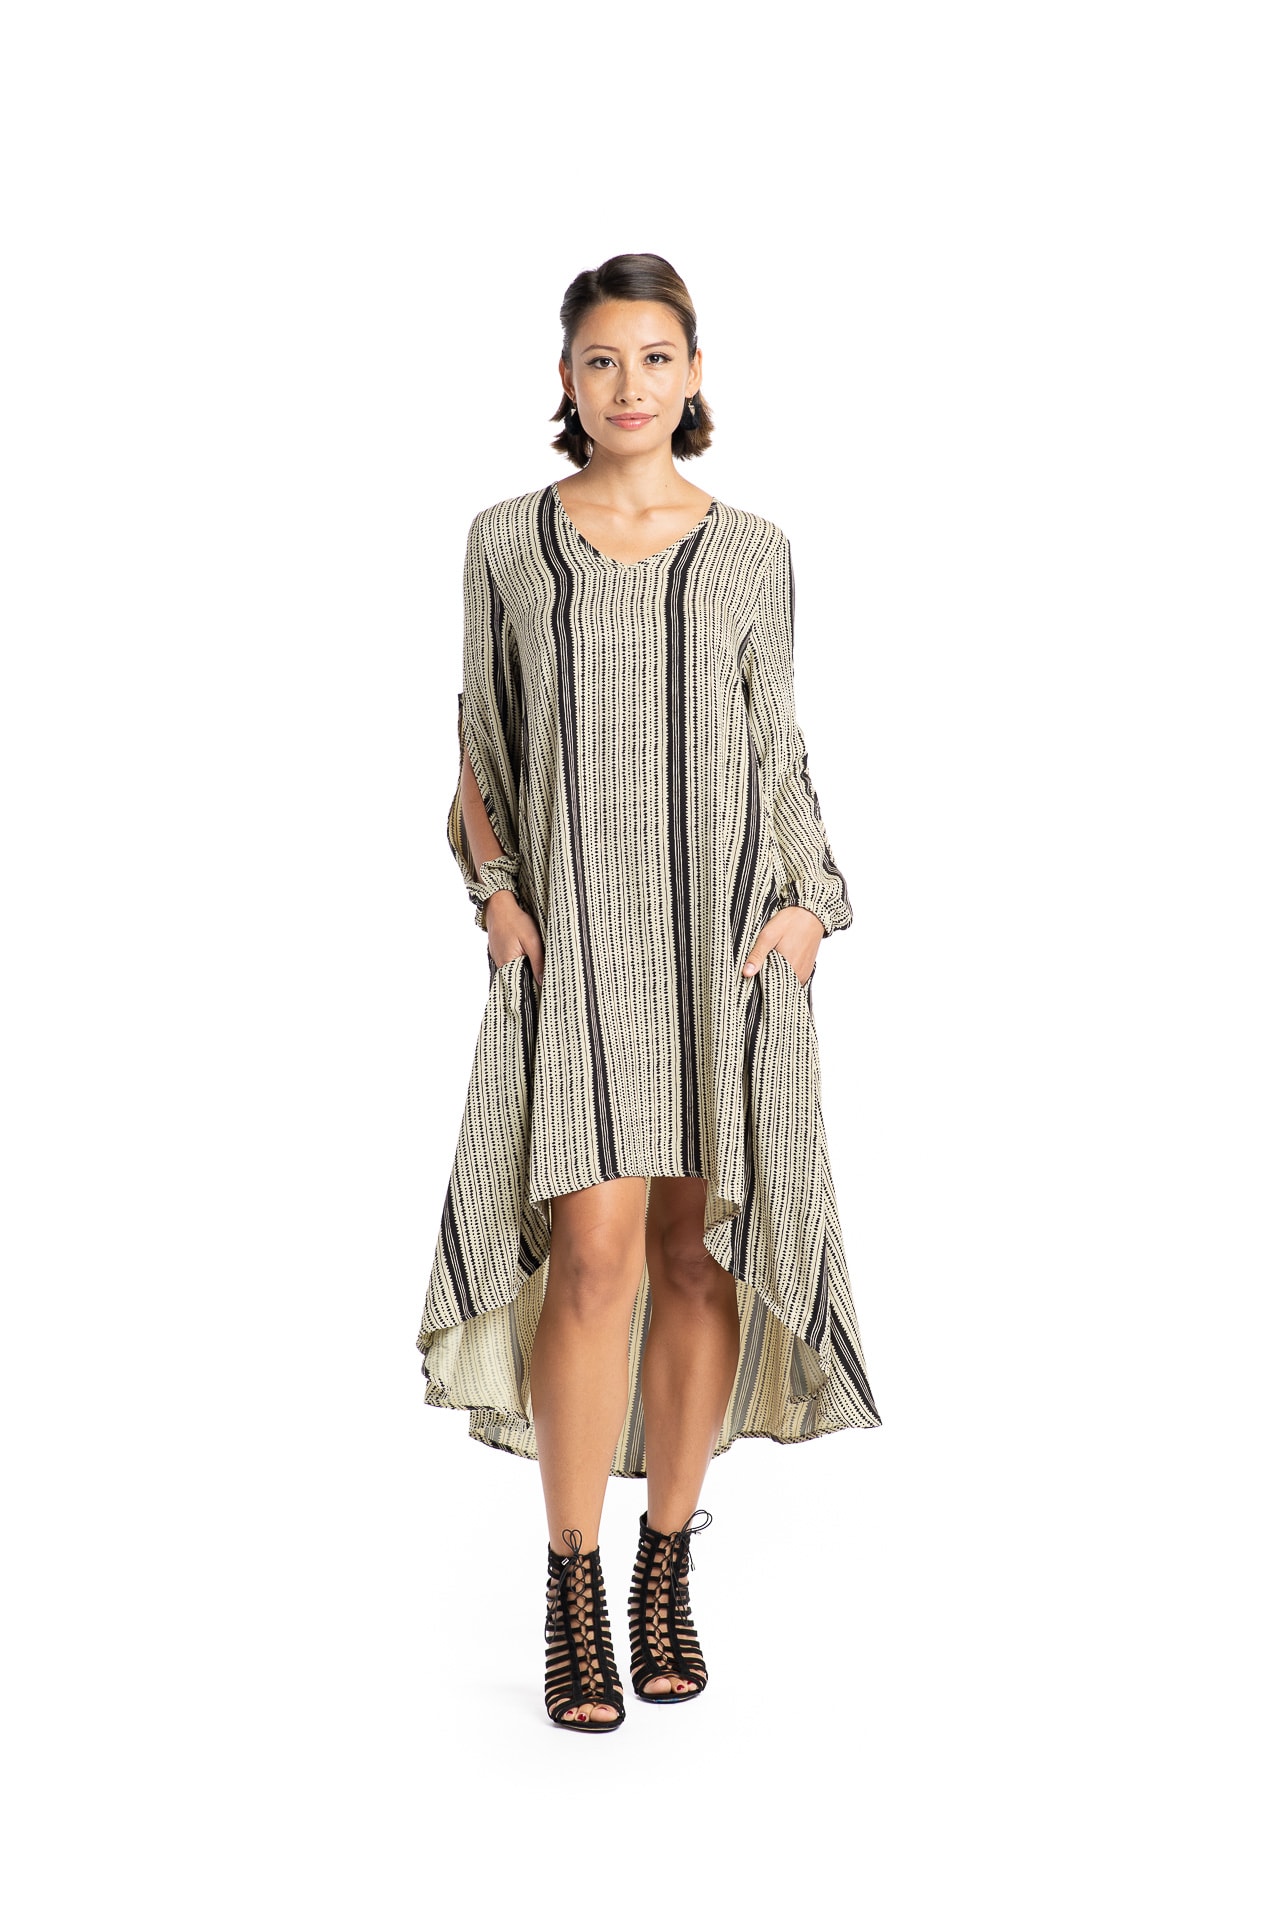 Keolani Dress in Sage Green - Front View